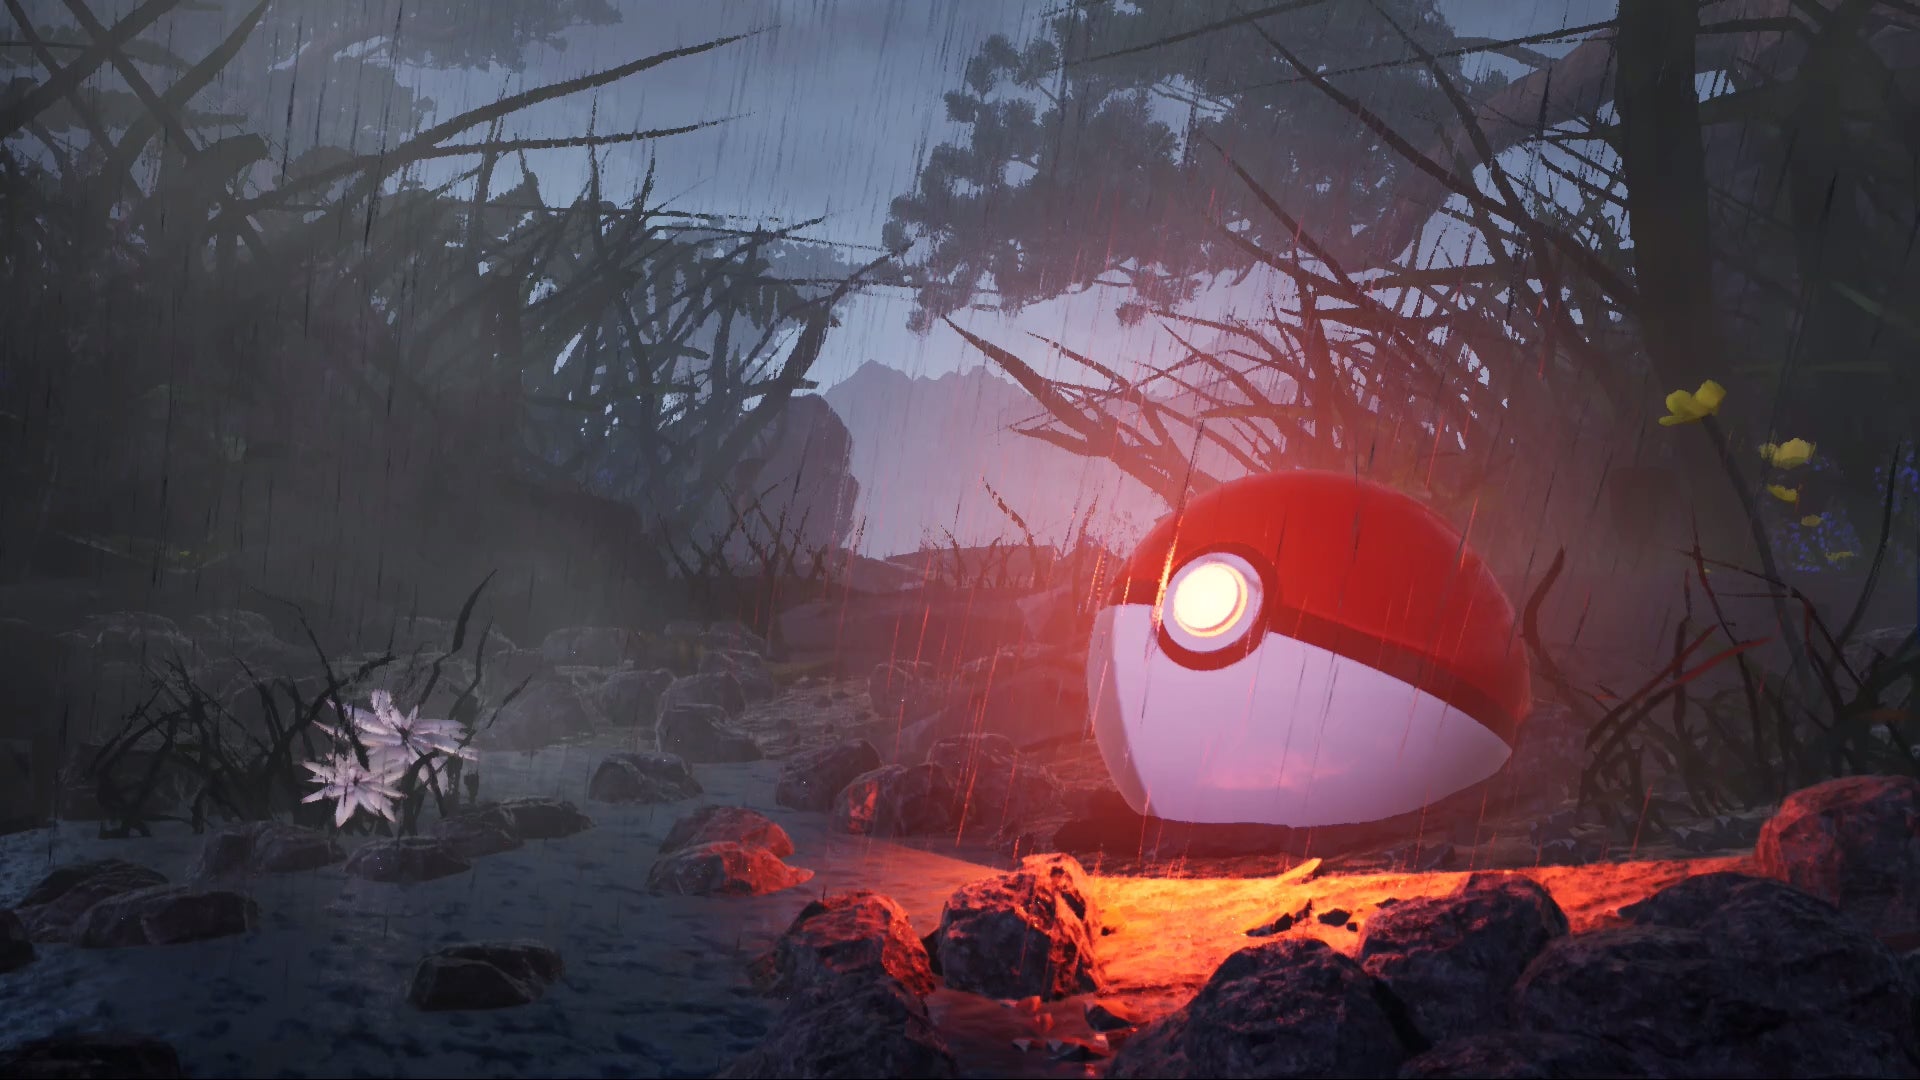 Pokemon Wallpaper. I just added this to Wallpaper Engine for the people requesting it. :)